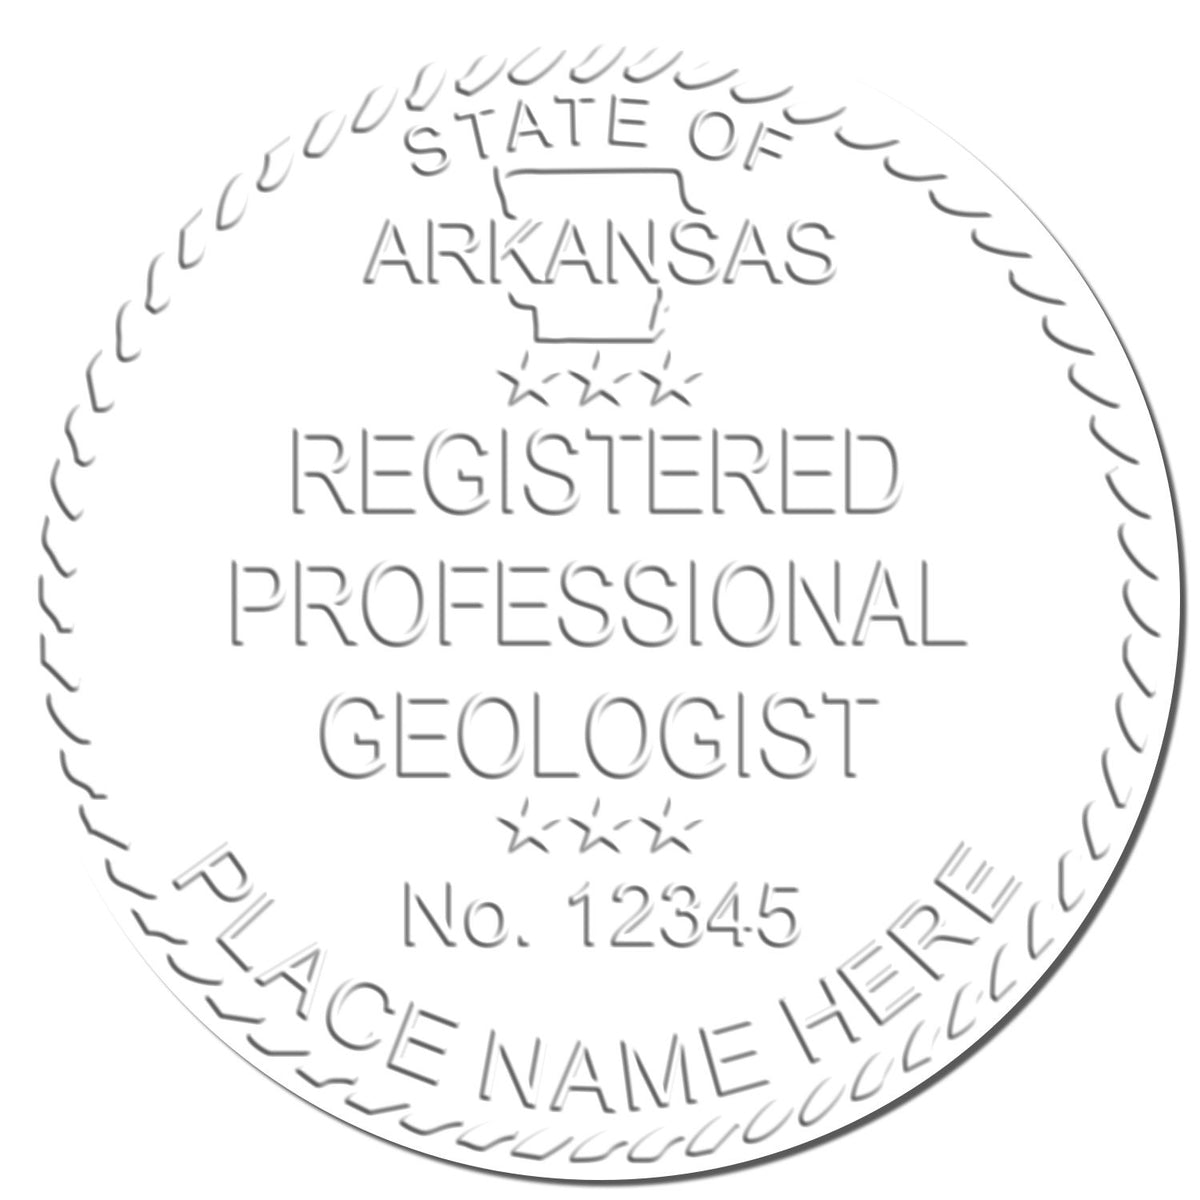 A photograph of the Hybrid Arkansas Geologist Seal stamp impression reveals a vivid, professional image of the on paper.